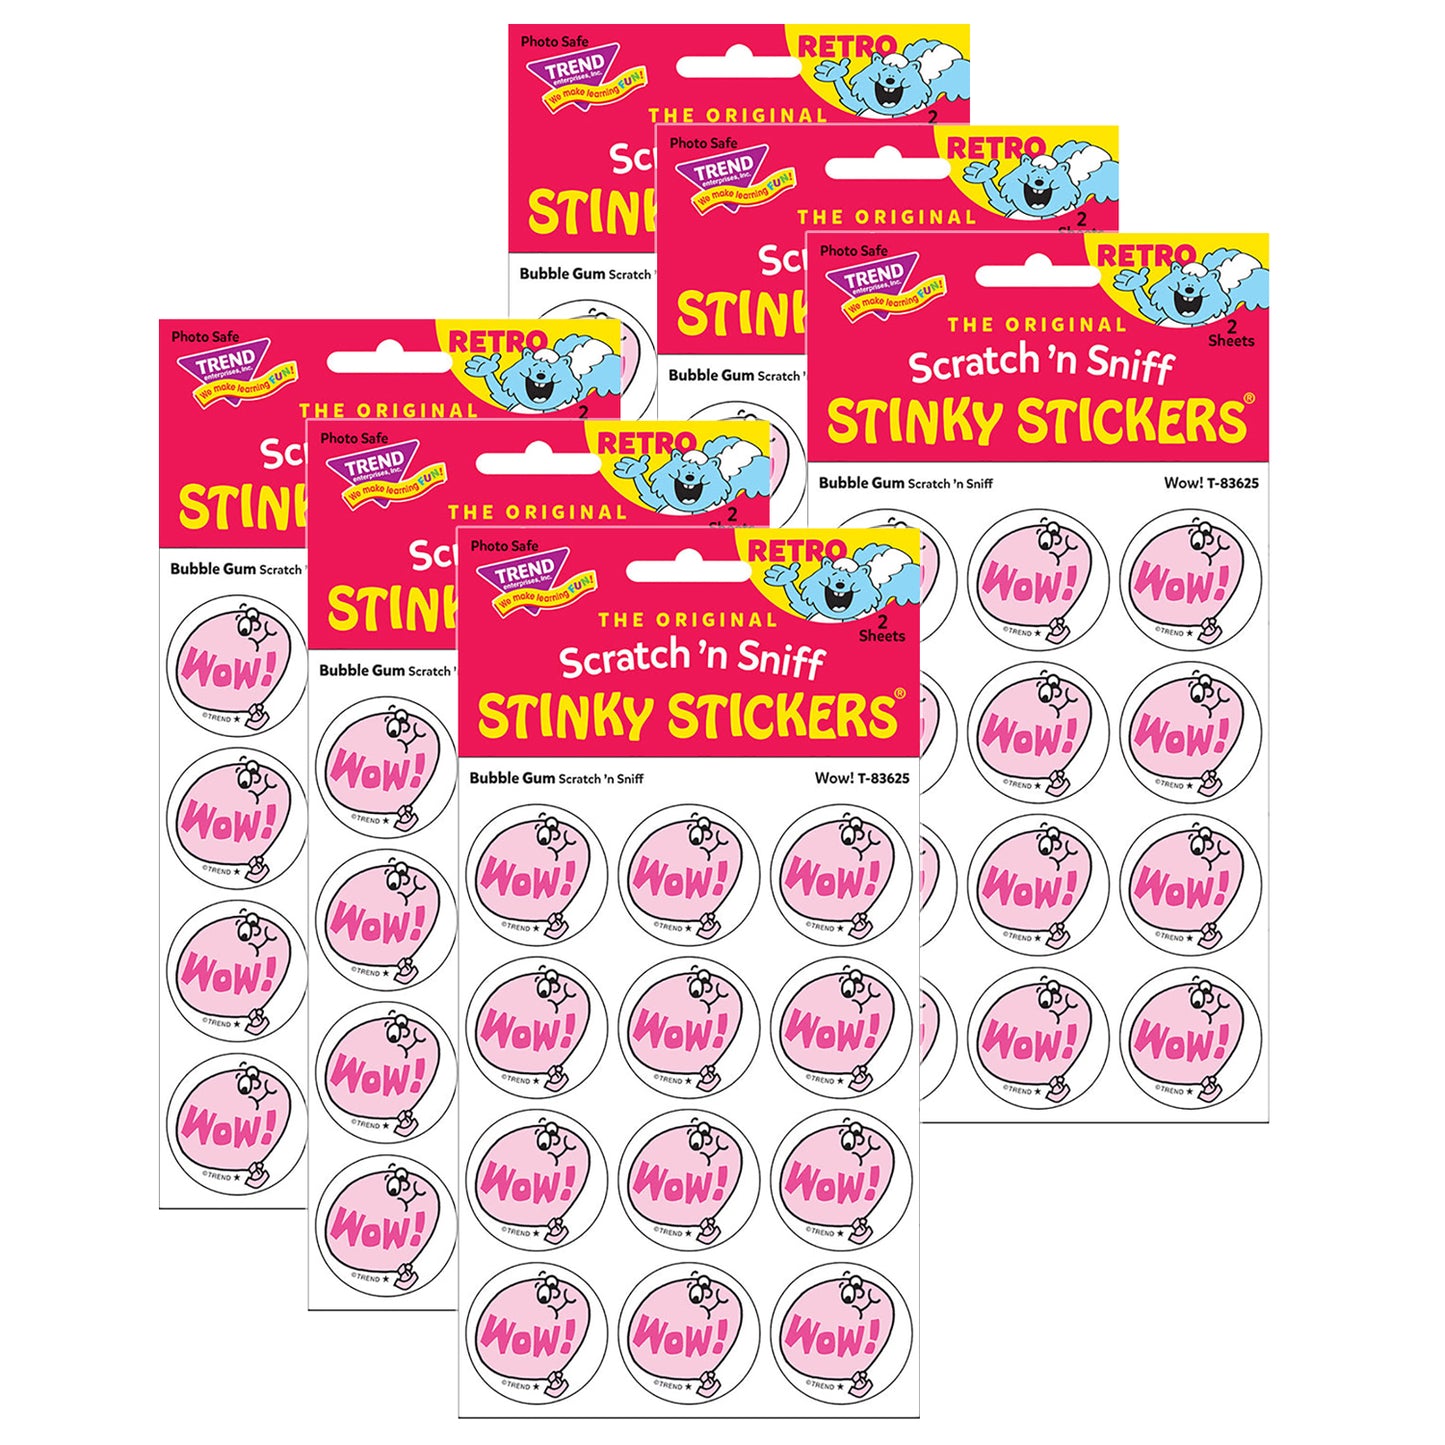 Wow!/Bubble Gum Scented Stickers, 24 Per Pack, 6 Packs